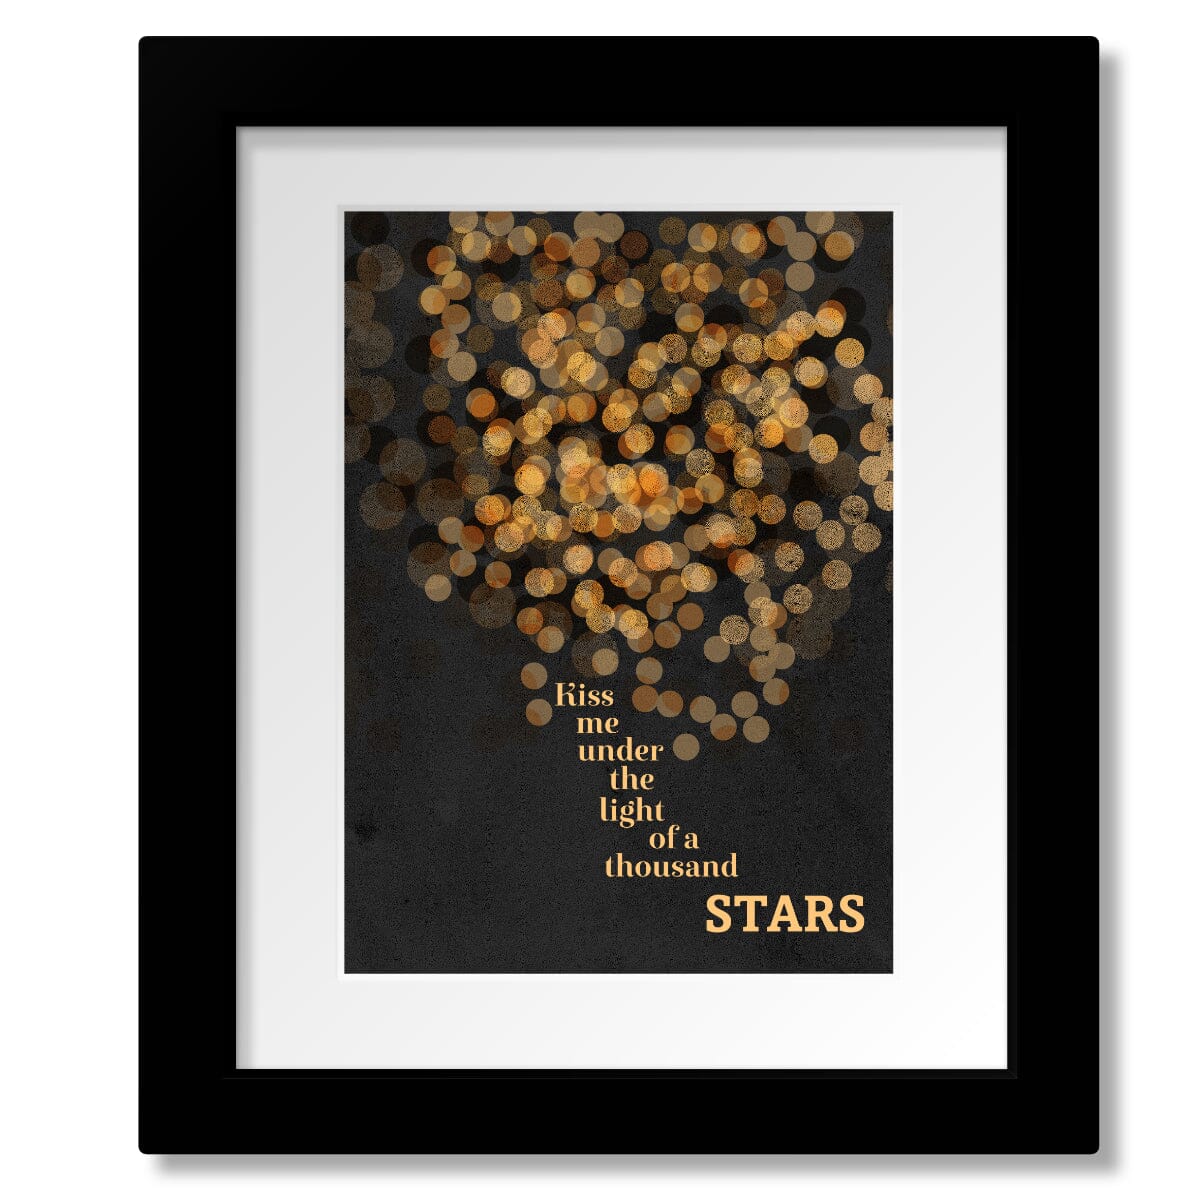 Thinking Out Loud by Ed Sheeran - Wedding Pop Song Print Song Lyrics Art Song Lyrics Art 8x10 Matted and Framed Print 